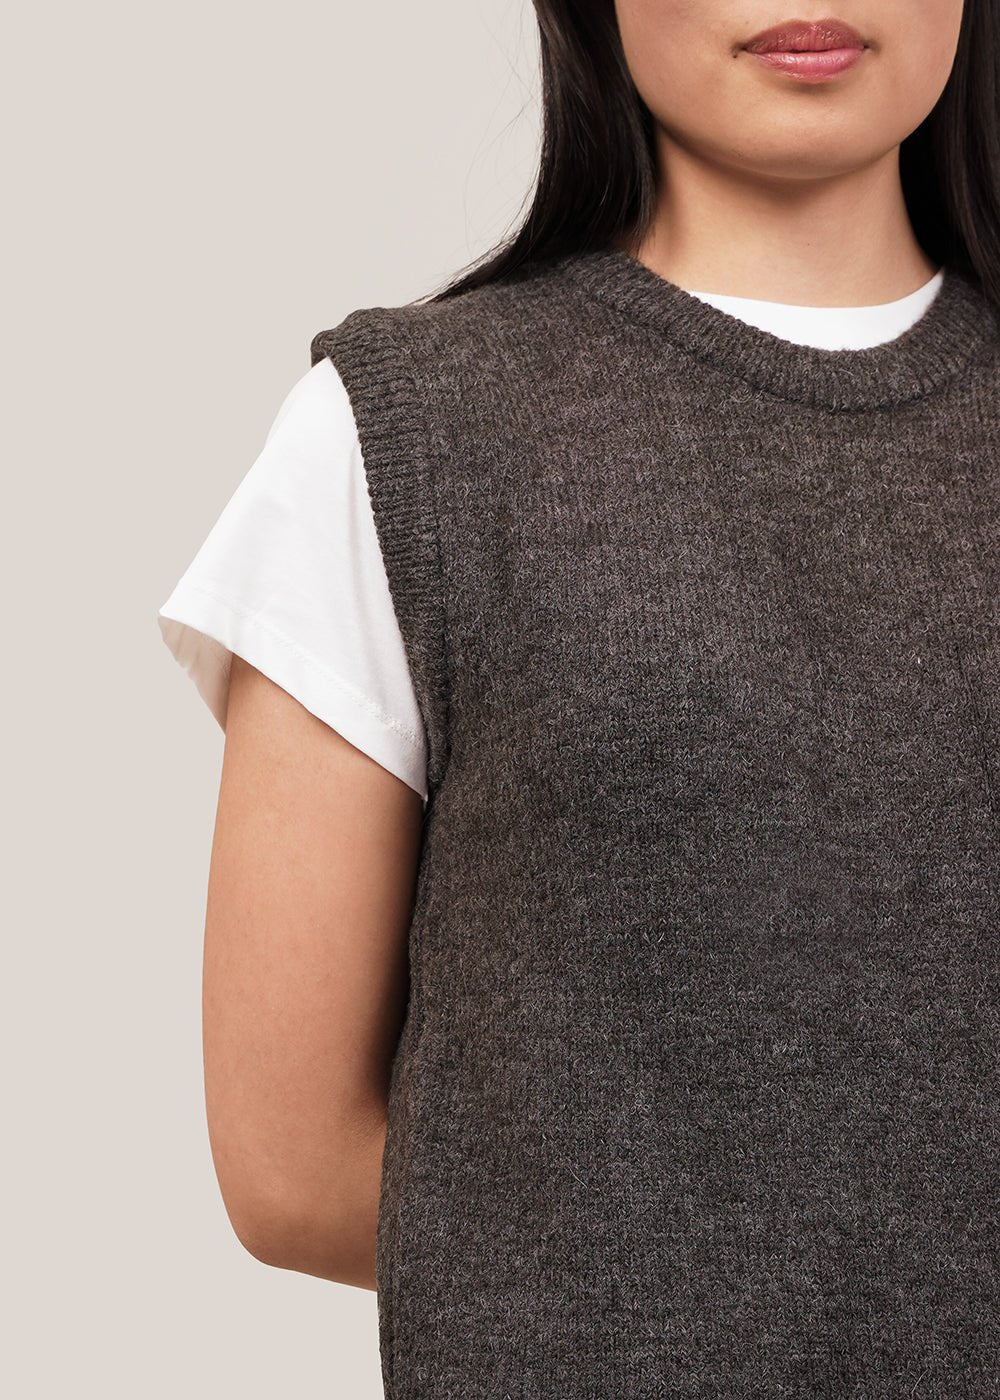 Mijeong Park Charcoal Crew Neck Vest - New Classics Studios Sustainable Ethical Fashion Canada